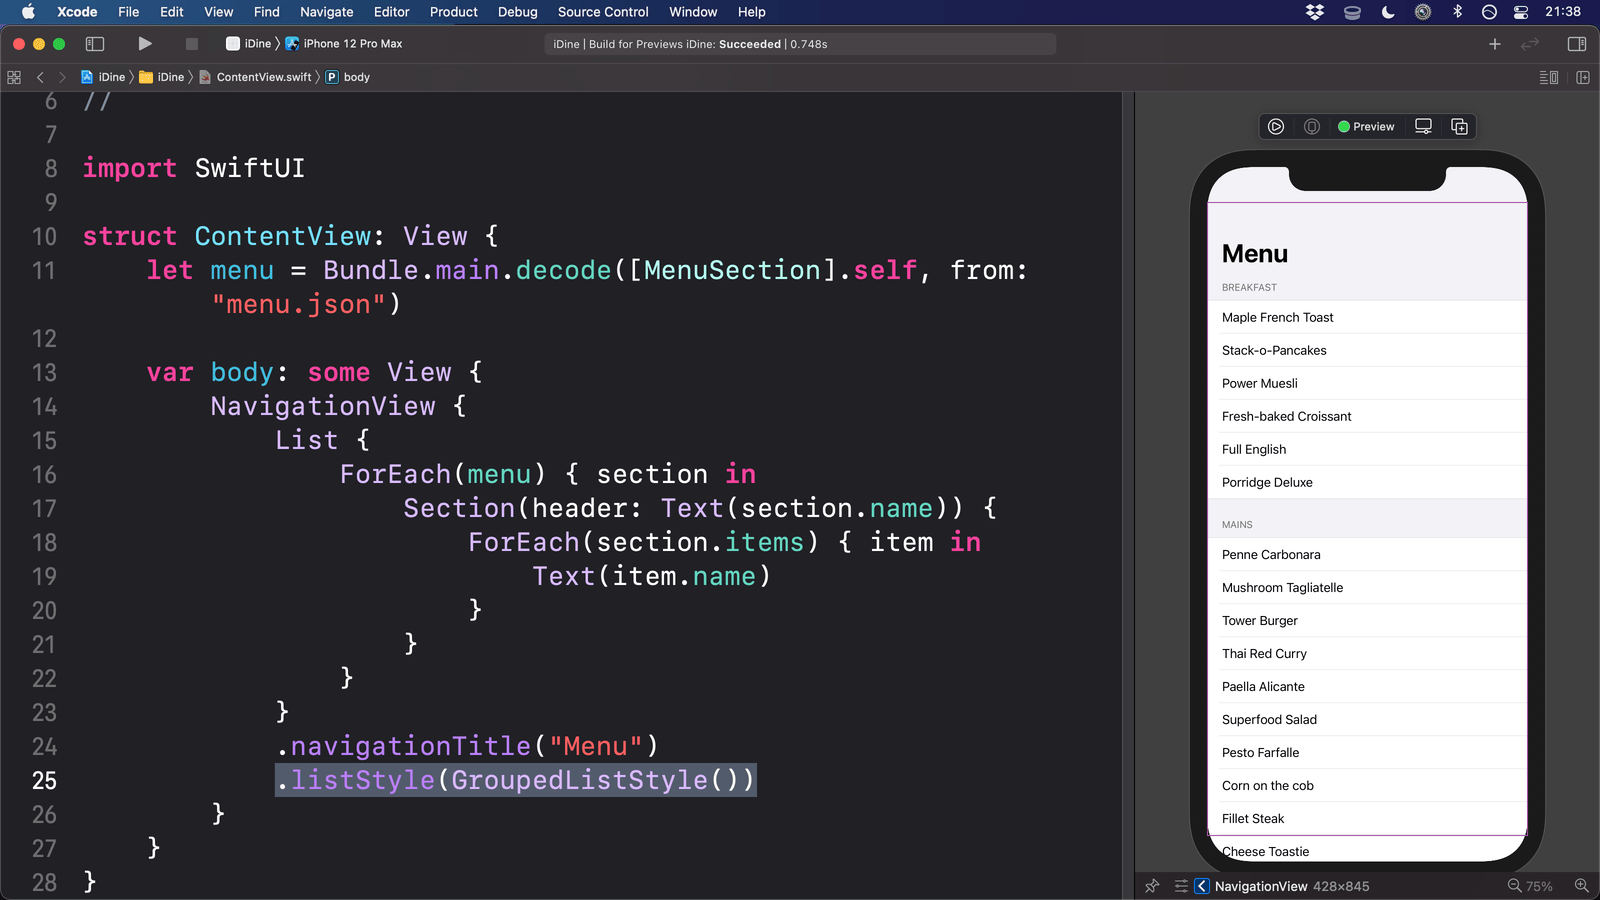 The SwiftUI list is now split neatly into grouped sections.